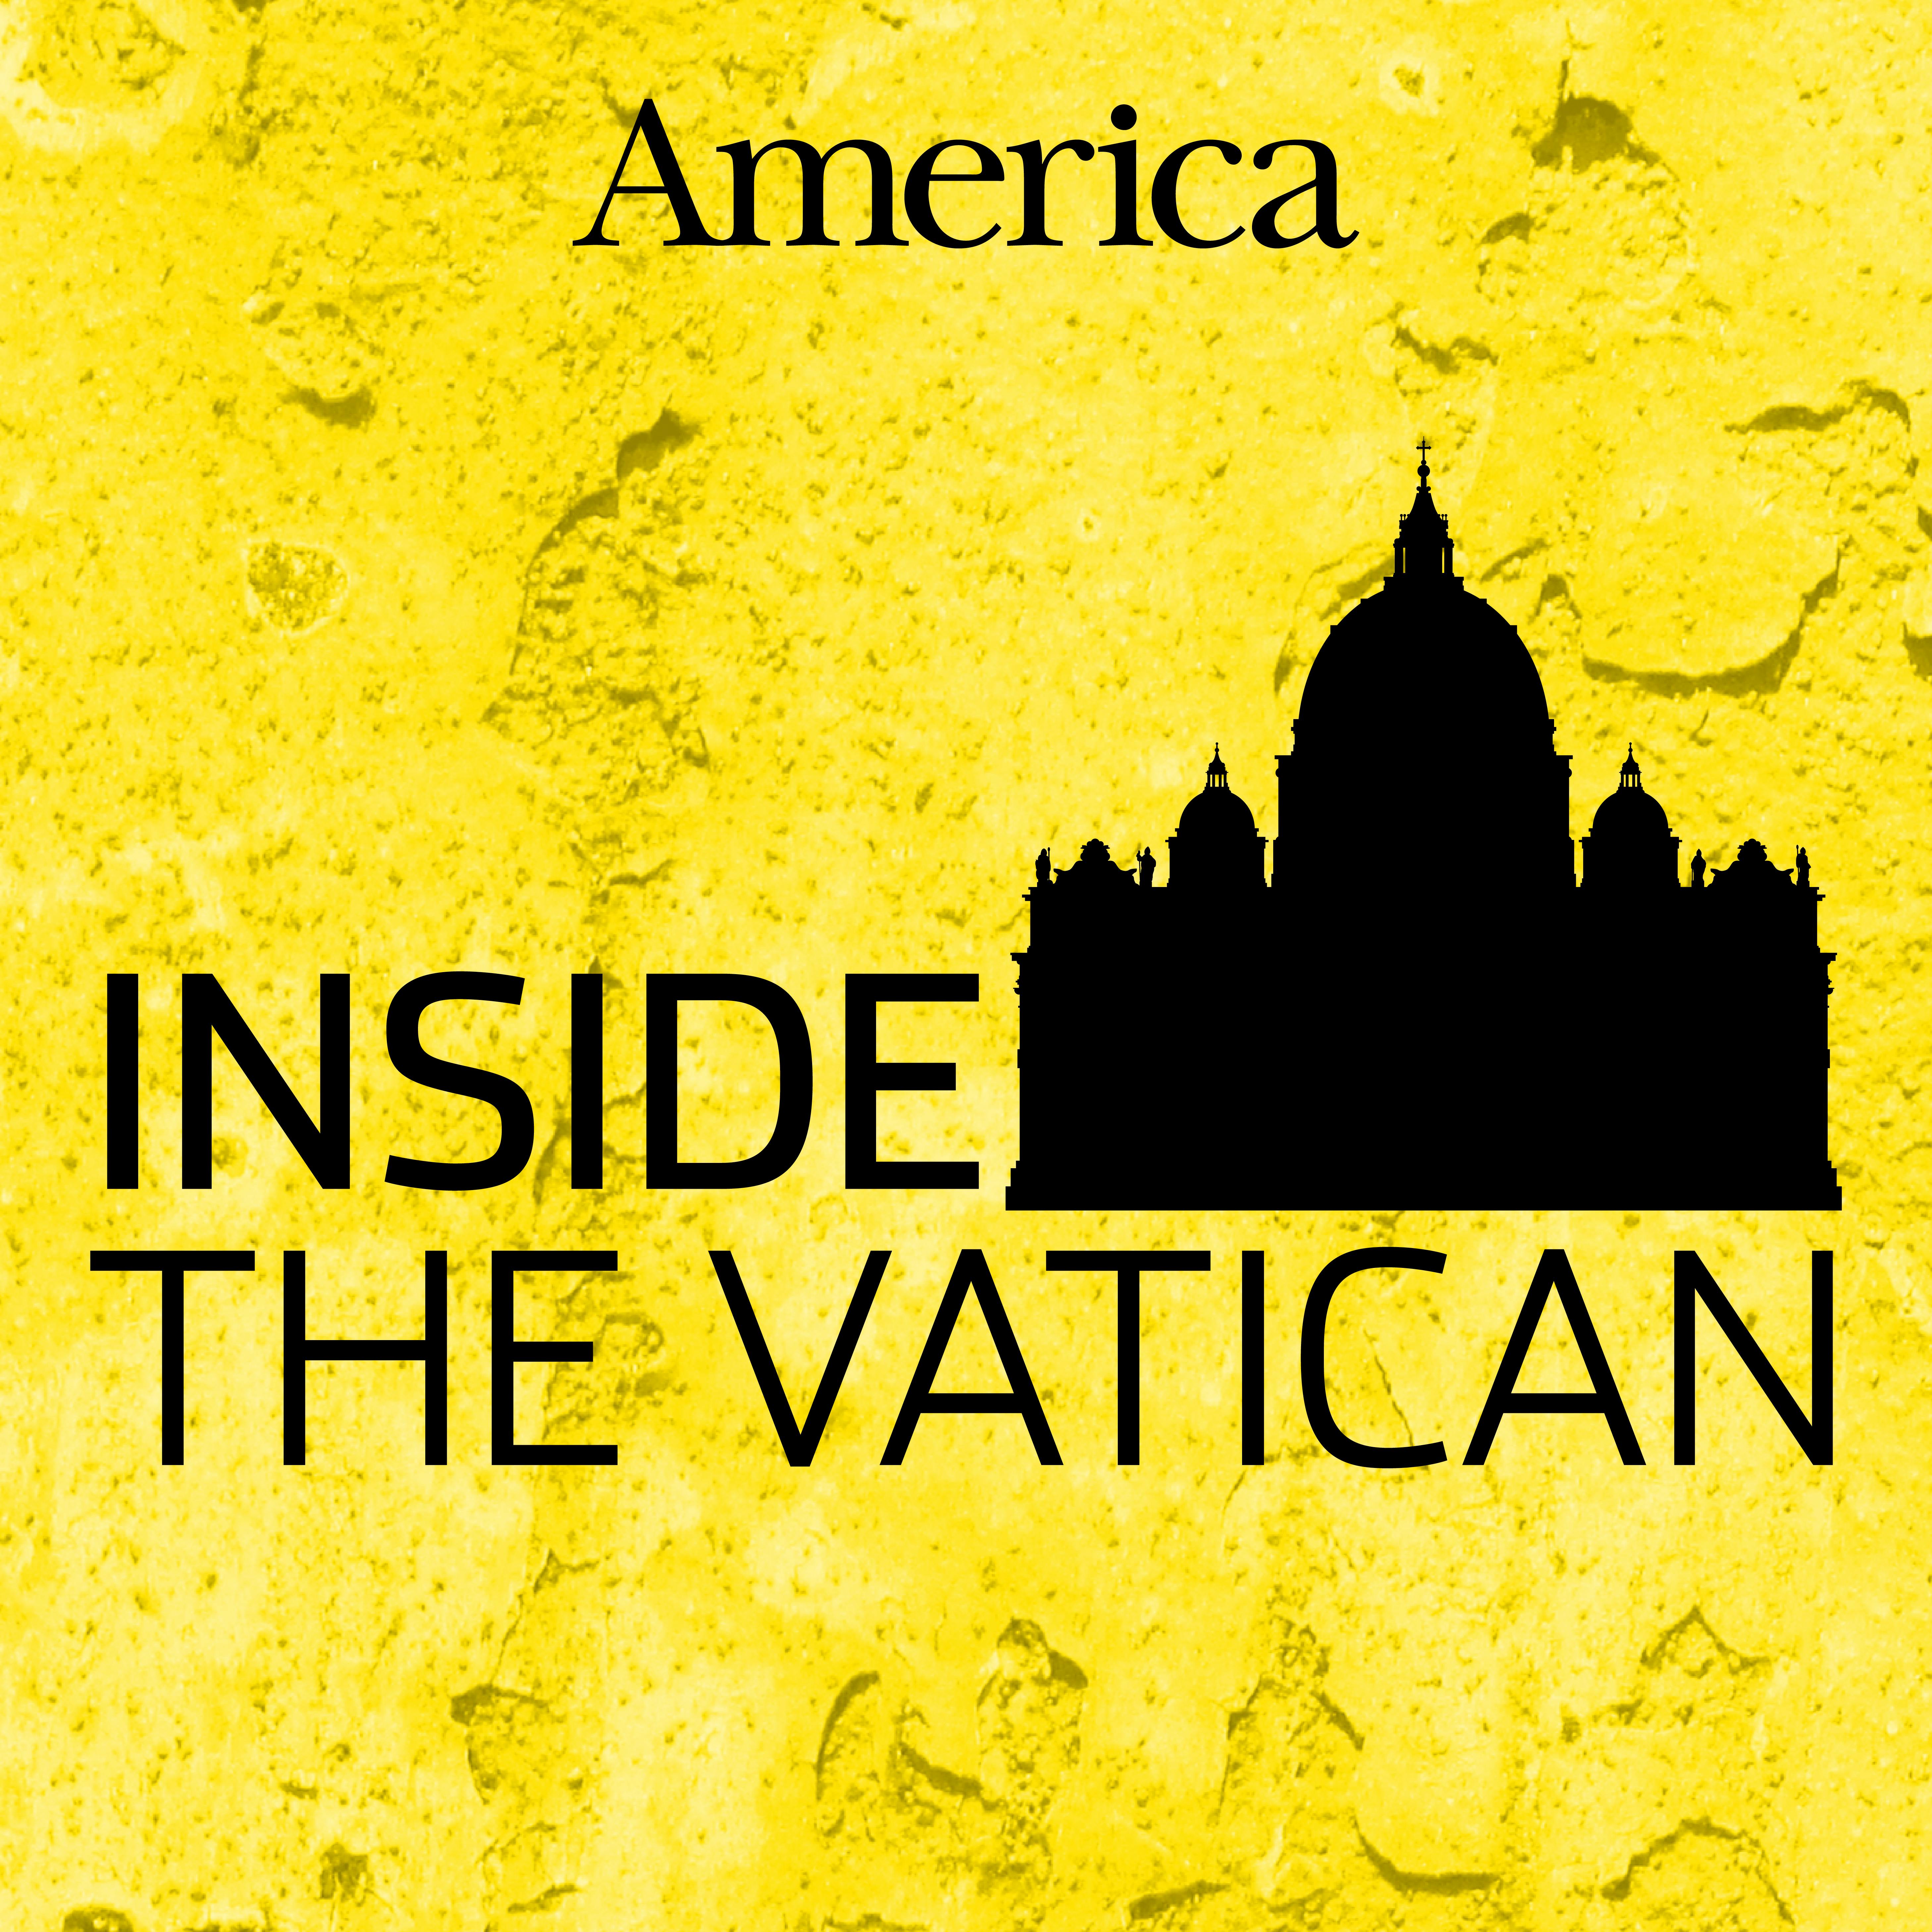 Did Benedict XVI co-author a new book on priestly celibacy?